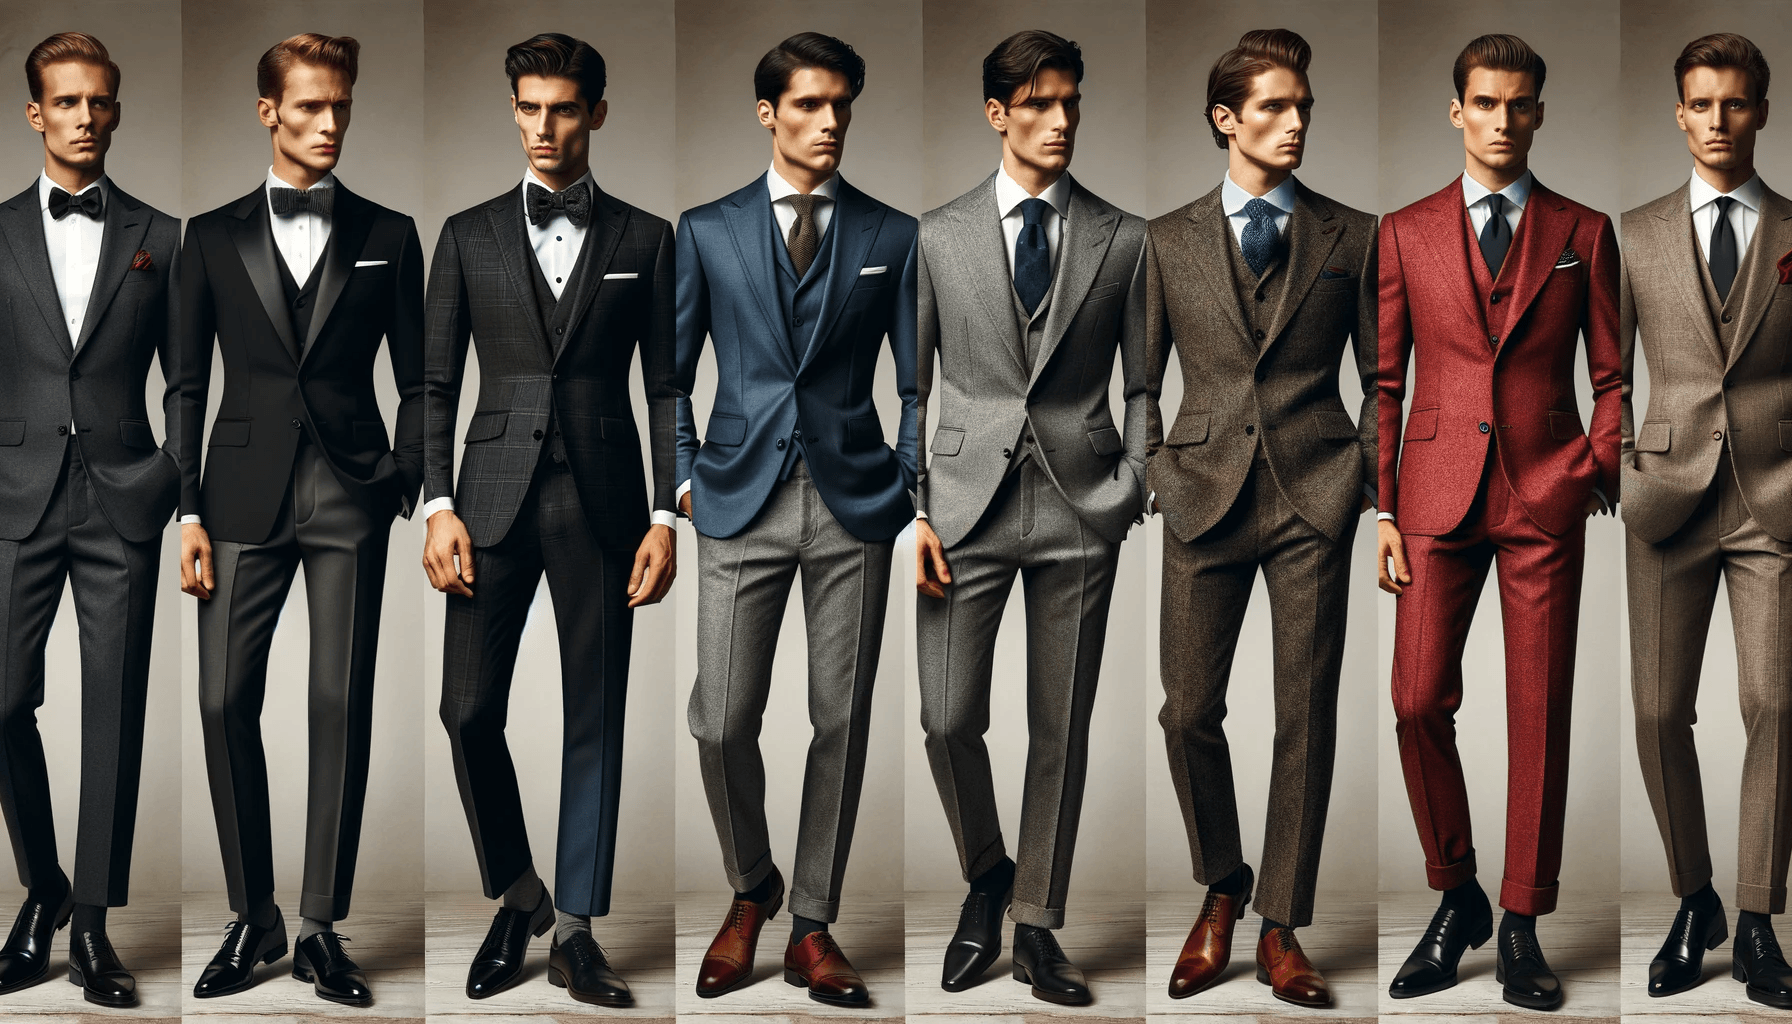 HOW TO CHOOSE THE RIGHT FIT STYLE FOR MEN'S SUITS: SLIM, REGULAR, OR TAILORED?